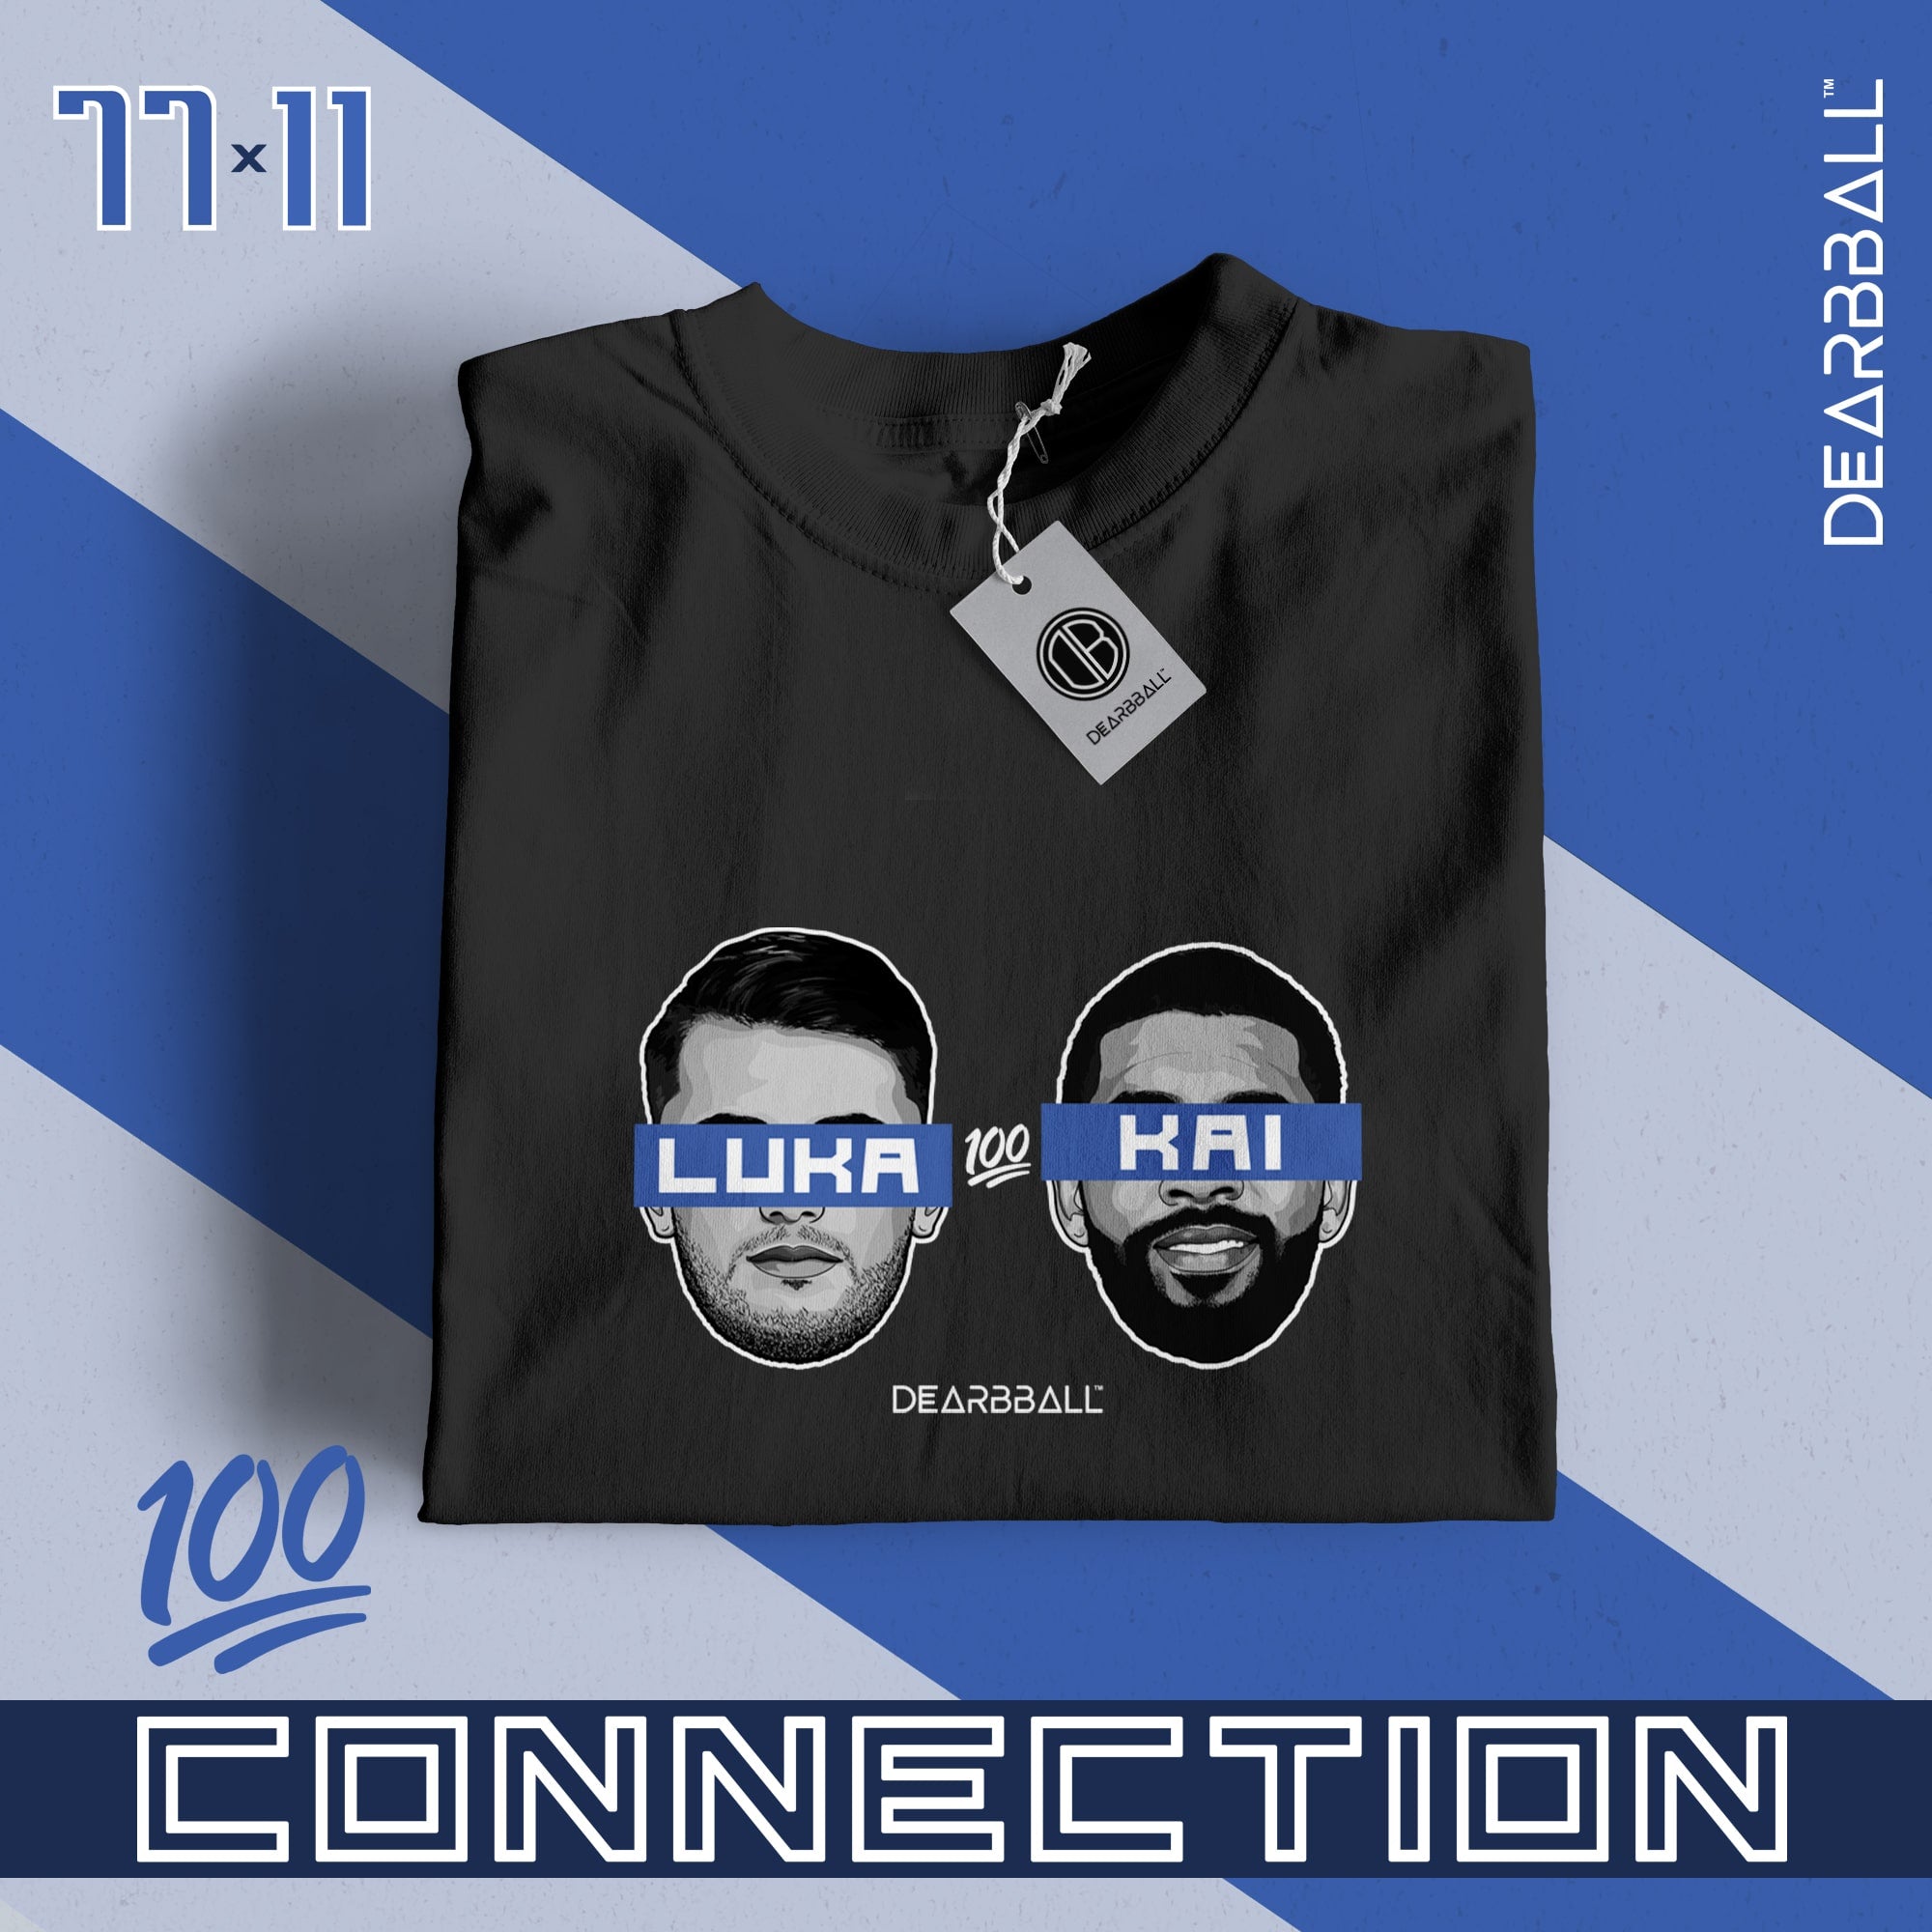 DearBBall T-Shirt - 100 Connection LukaMagic x Uncle Drew Limited Edition